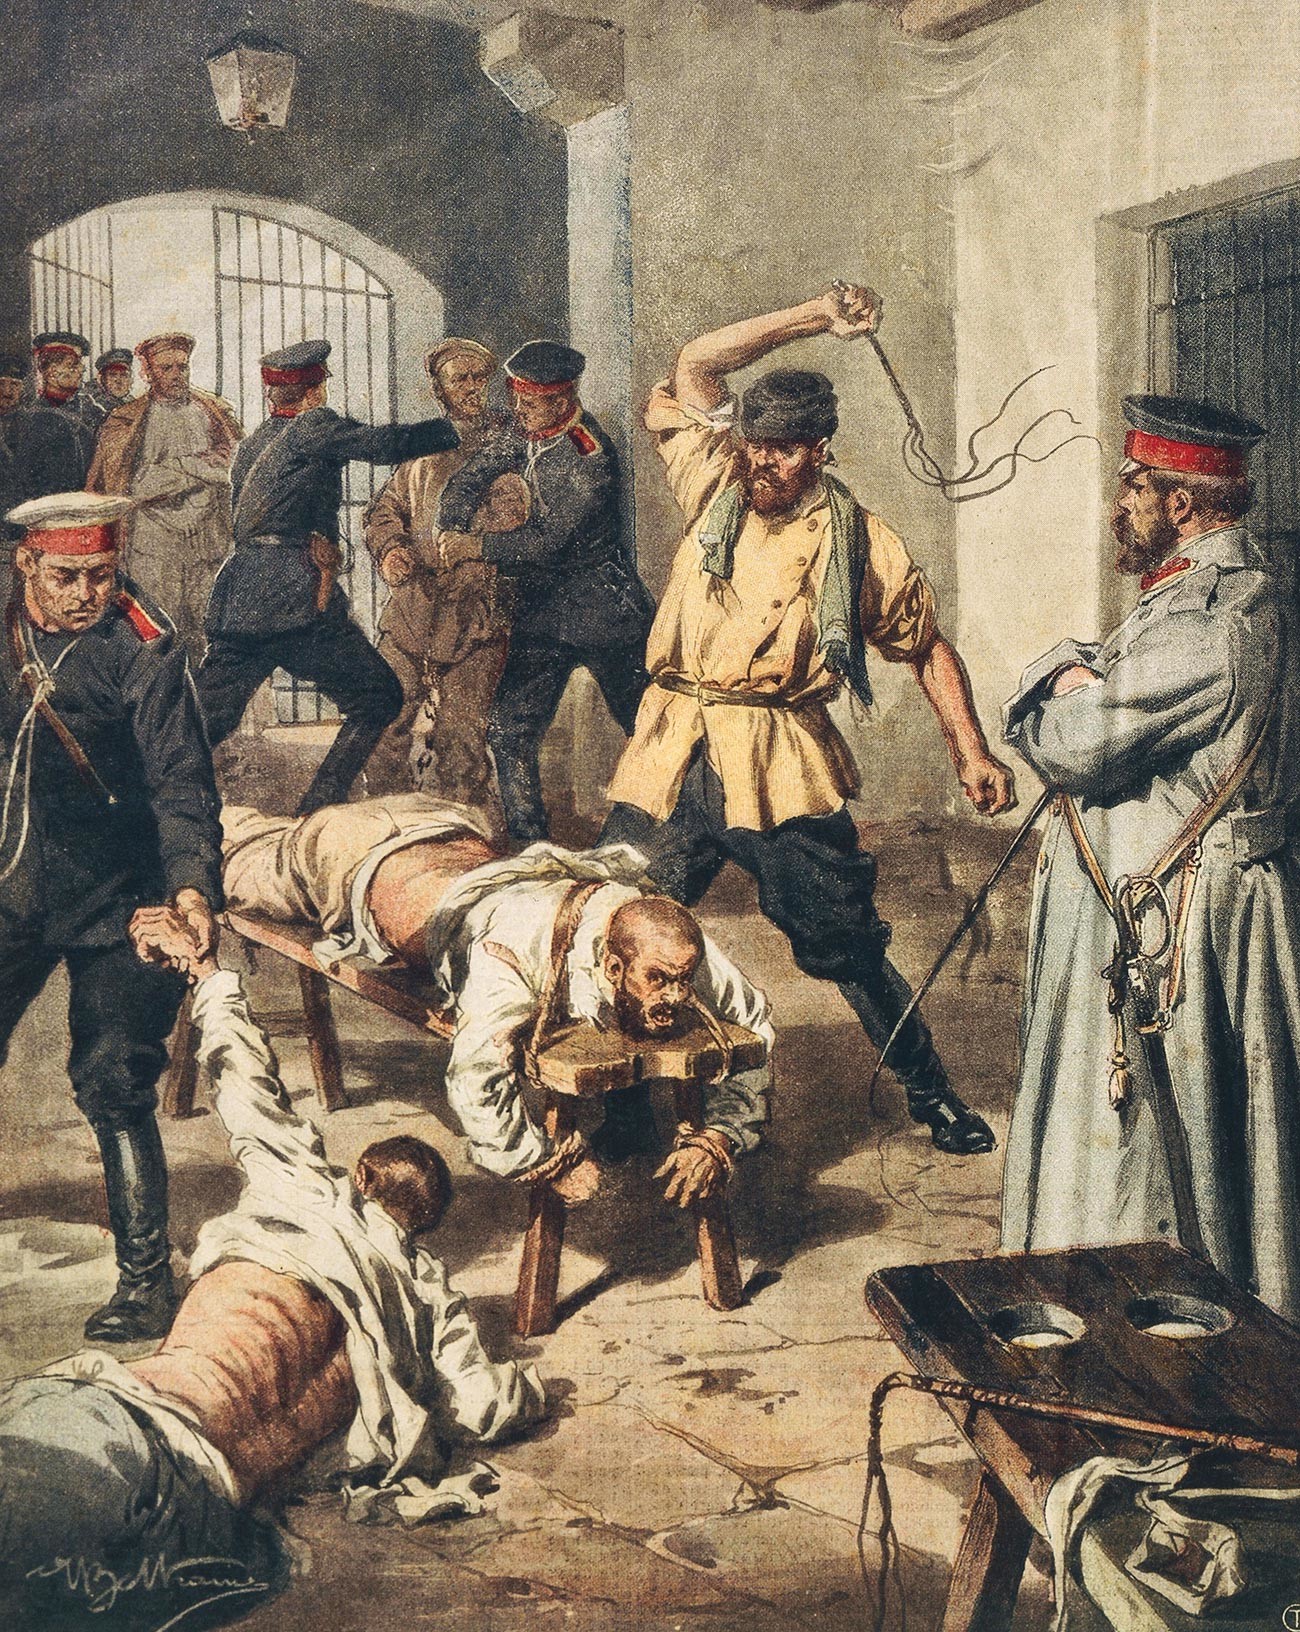 Whipping (from Achille Beltrame, La Domenica del Corriere. The horrors of Russian prisons)